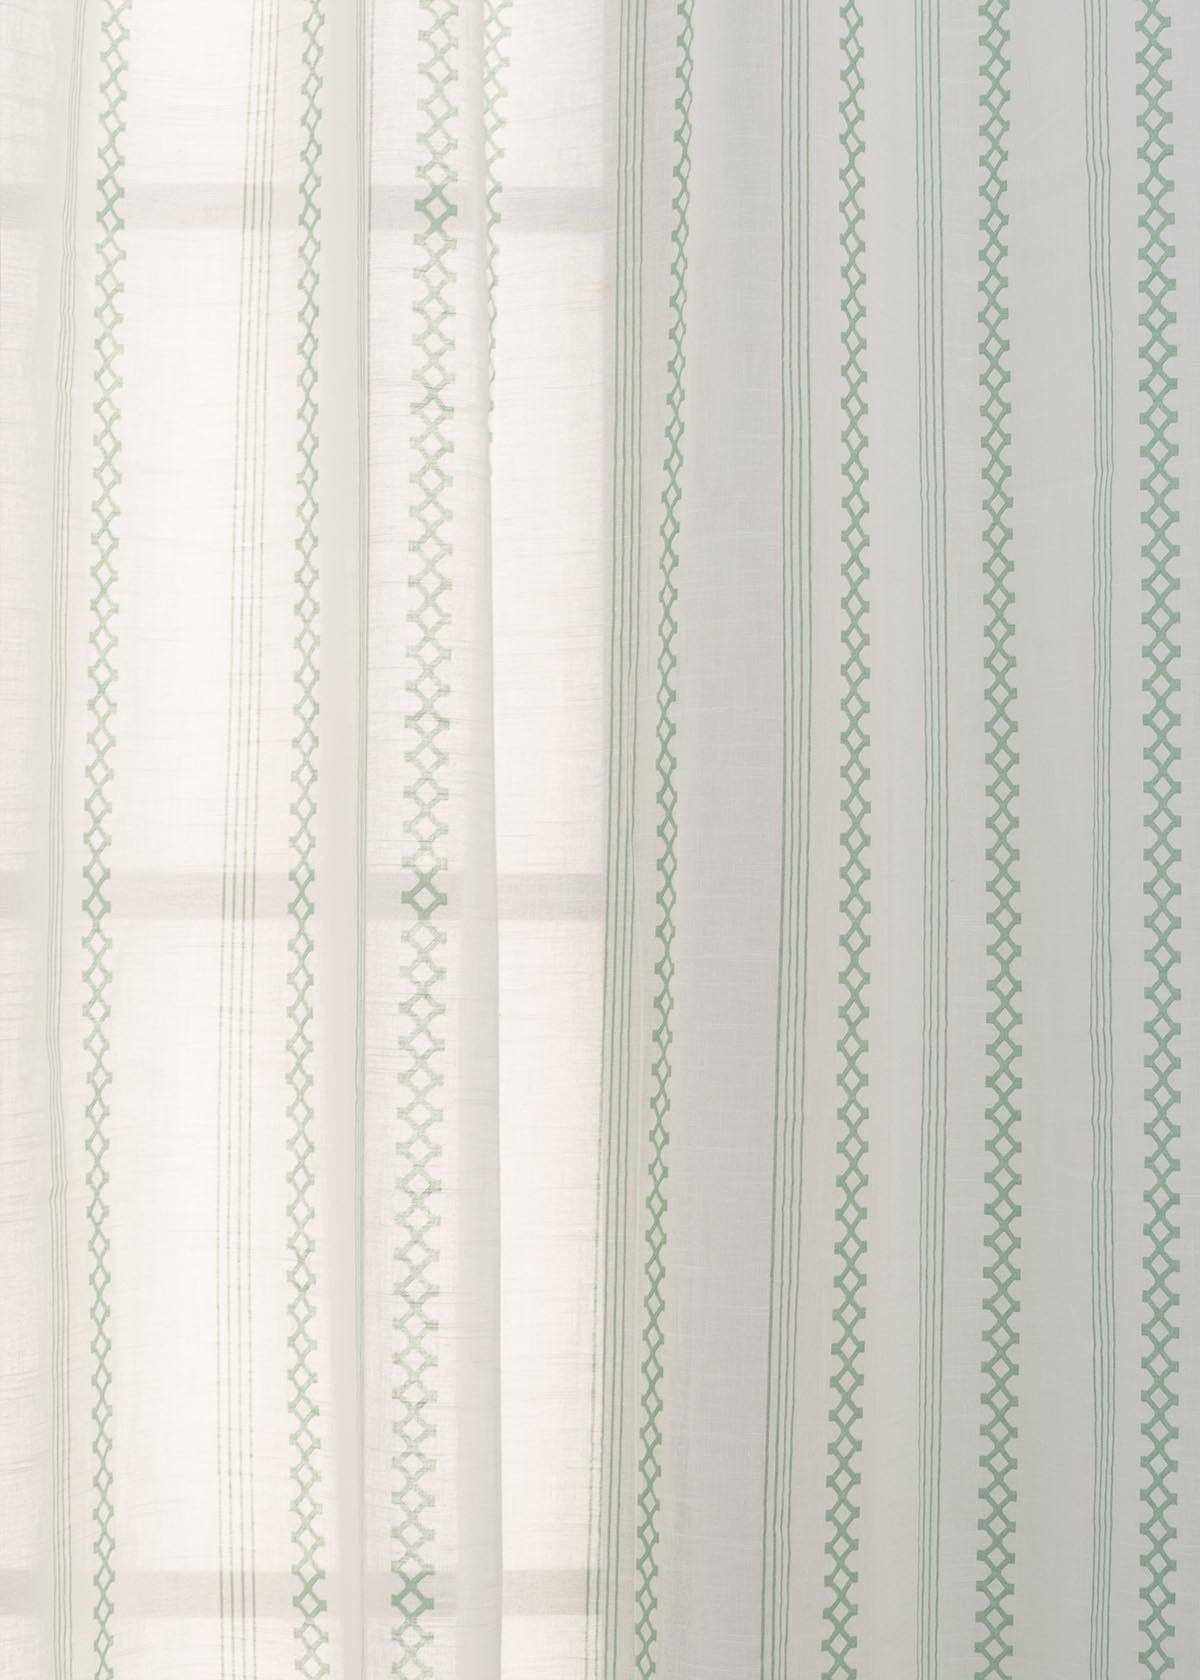 Picket Fence printed sheer Fabric - Sage Green